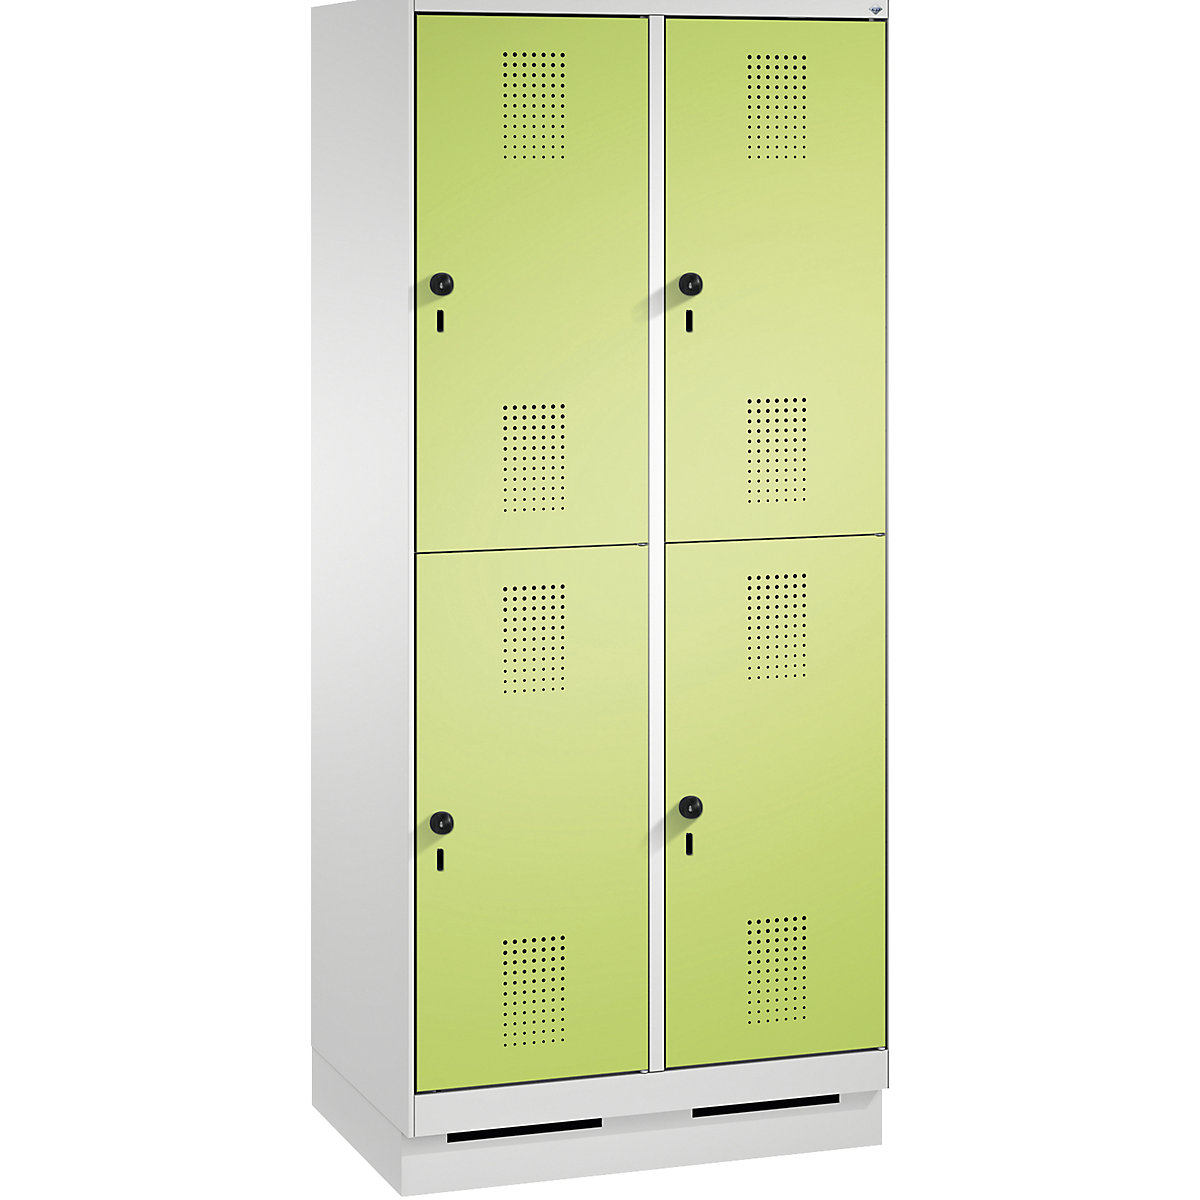 EVOLO cloakroom locker, double tier, with plinth – C+P, 2 compartments, 2 shelf compartments each, compartment width 400 mm, light grey / viridian green-9